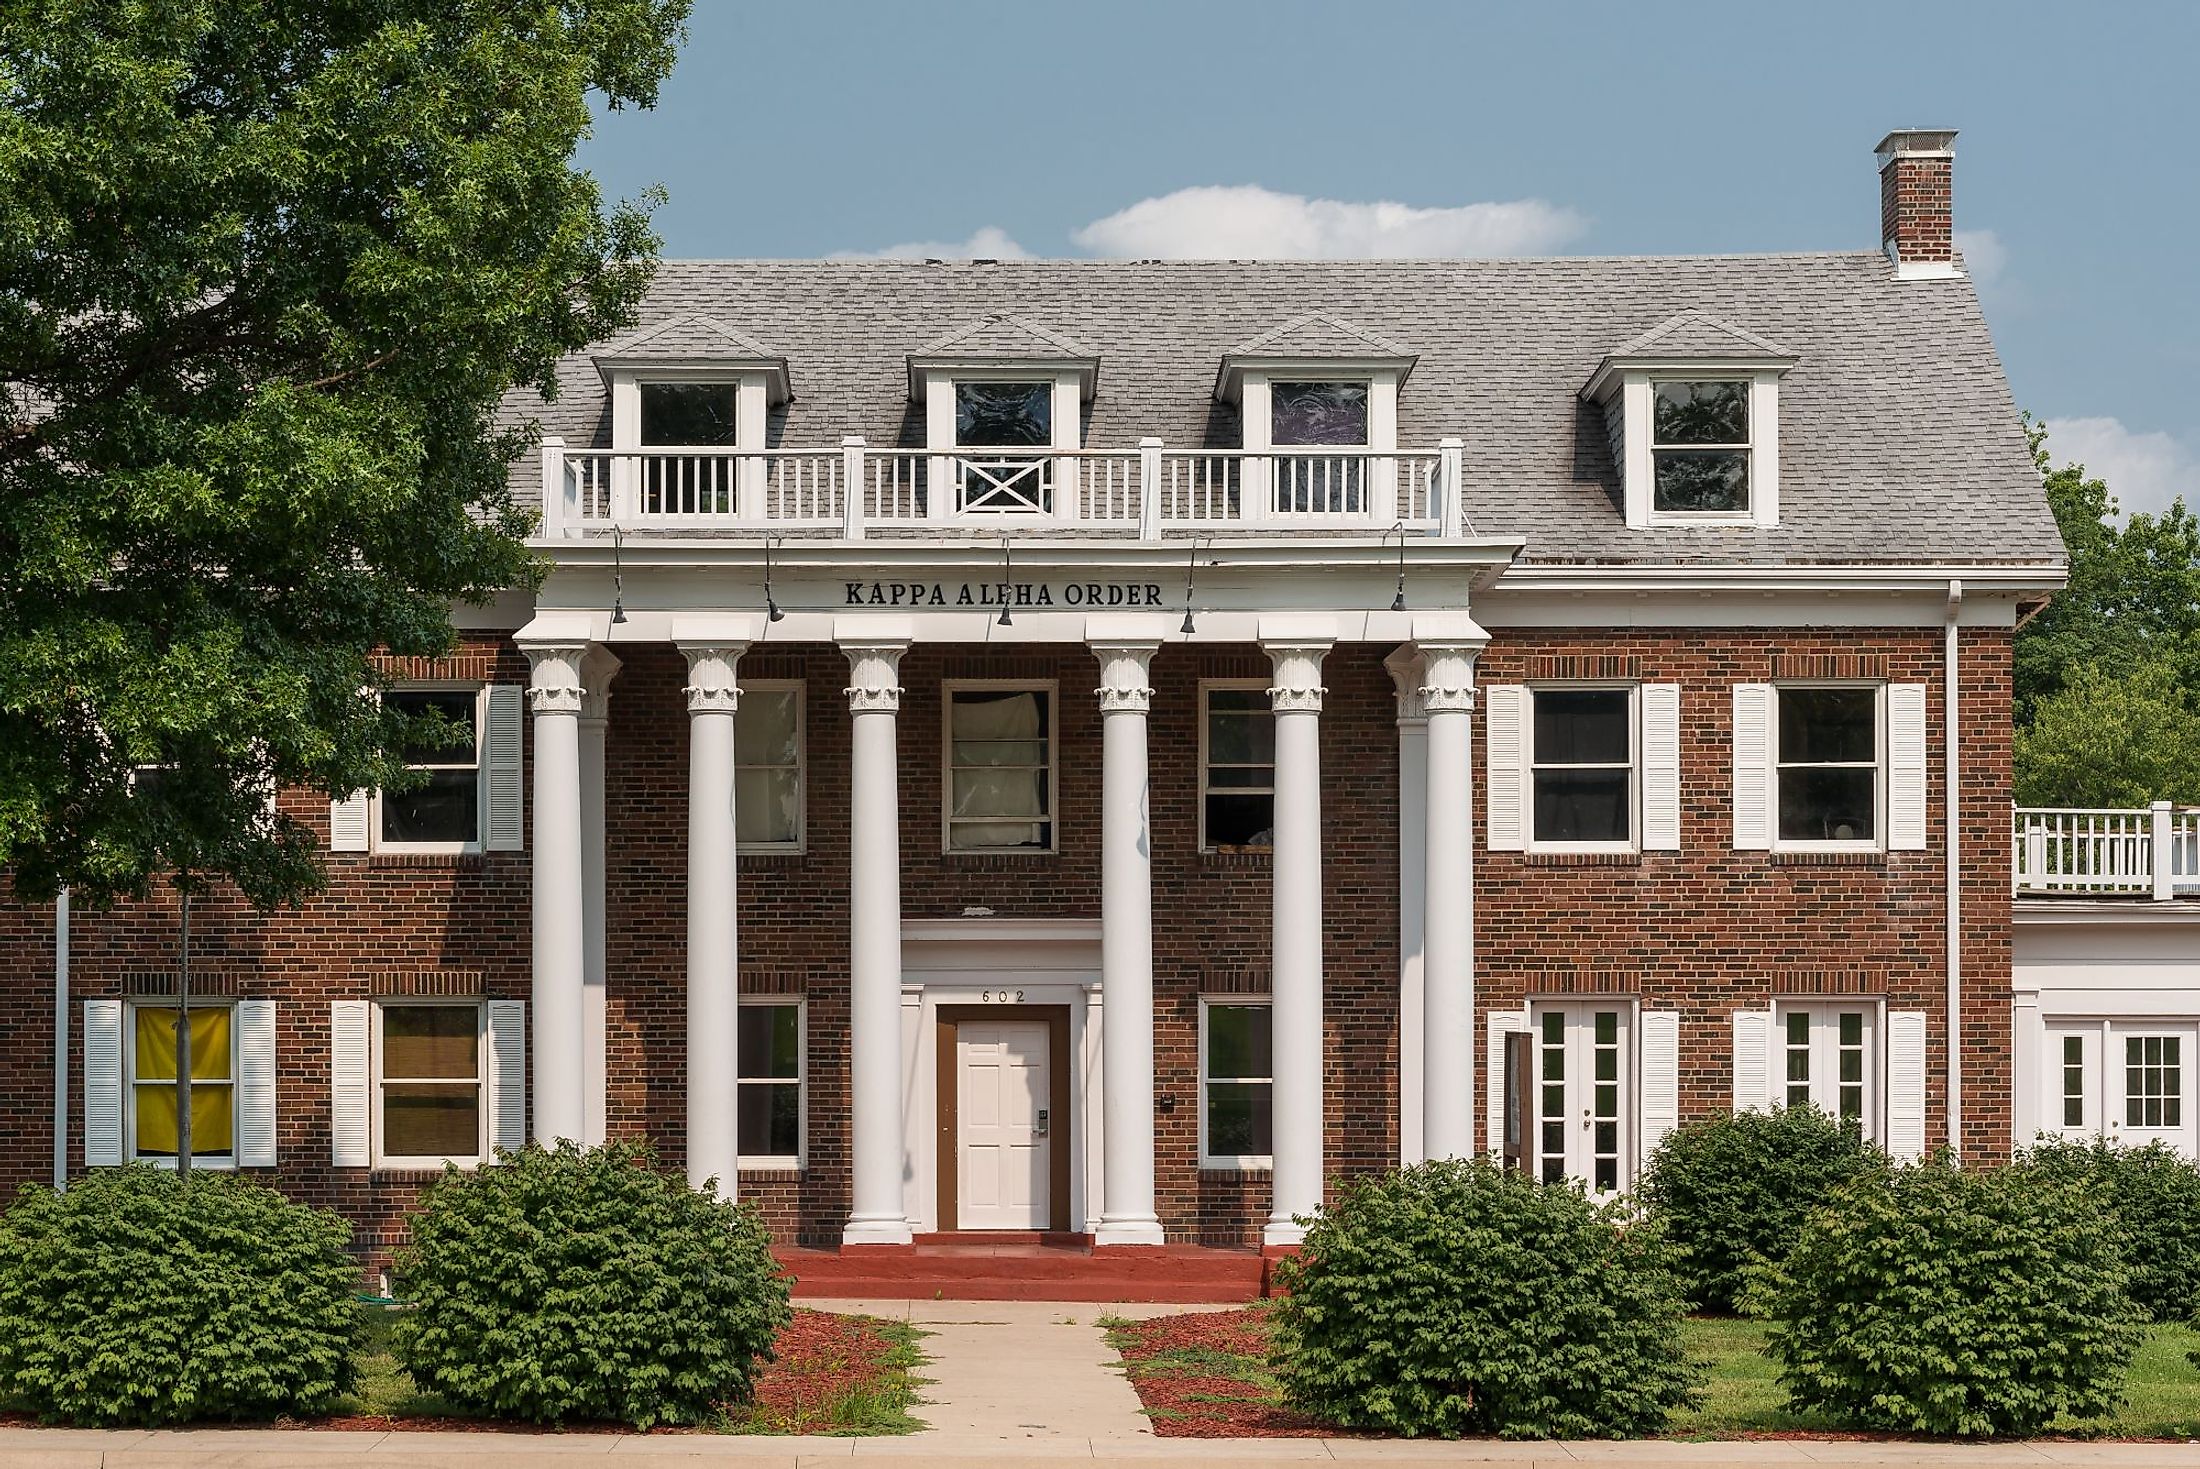 Kappa Alpha Order fraternity house on the campus of Westminster College in Fulton, Missouri. Editorial credit: Nagel Photography / Shutterstock.com